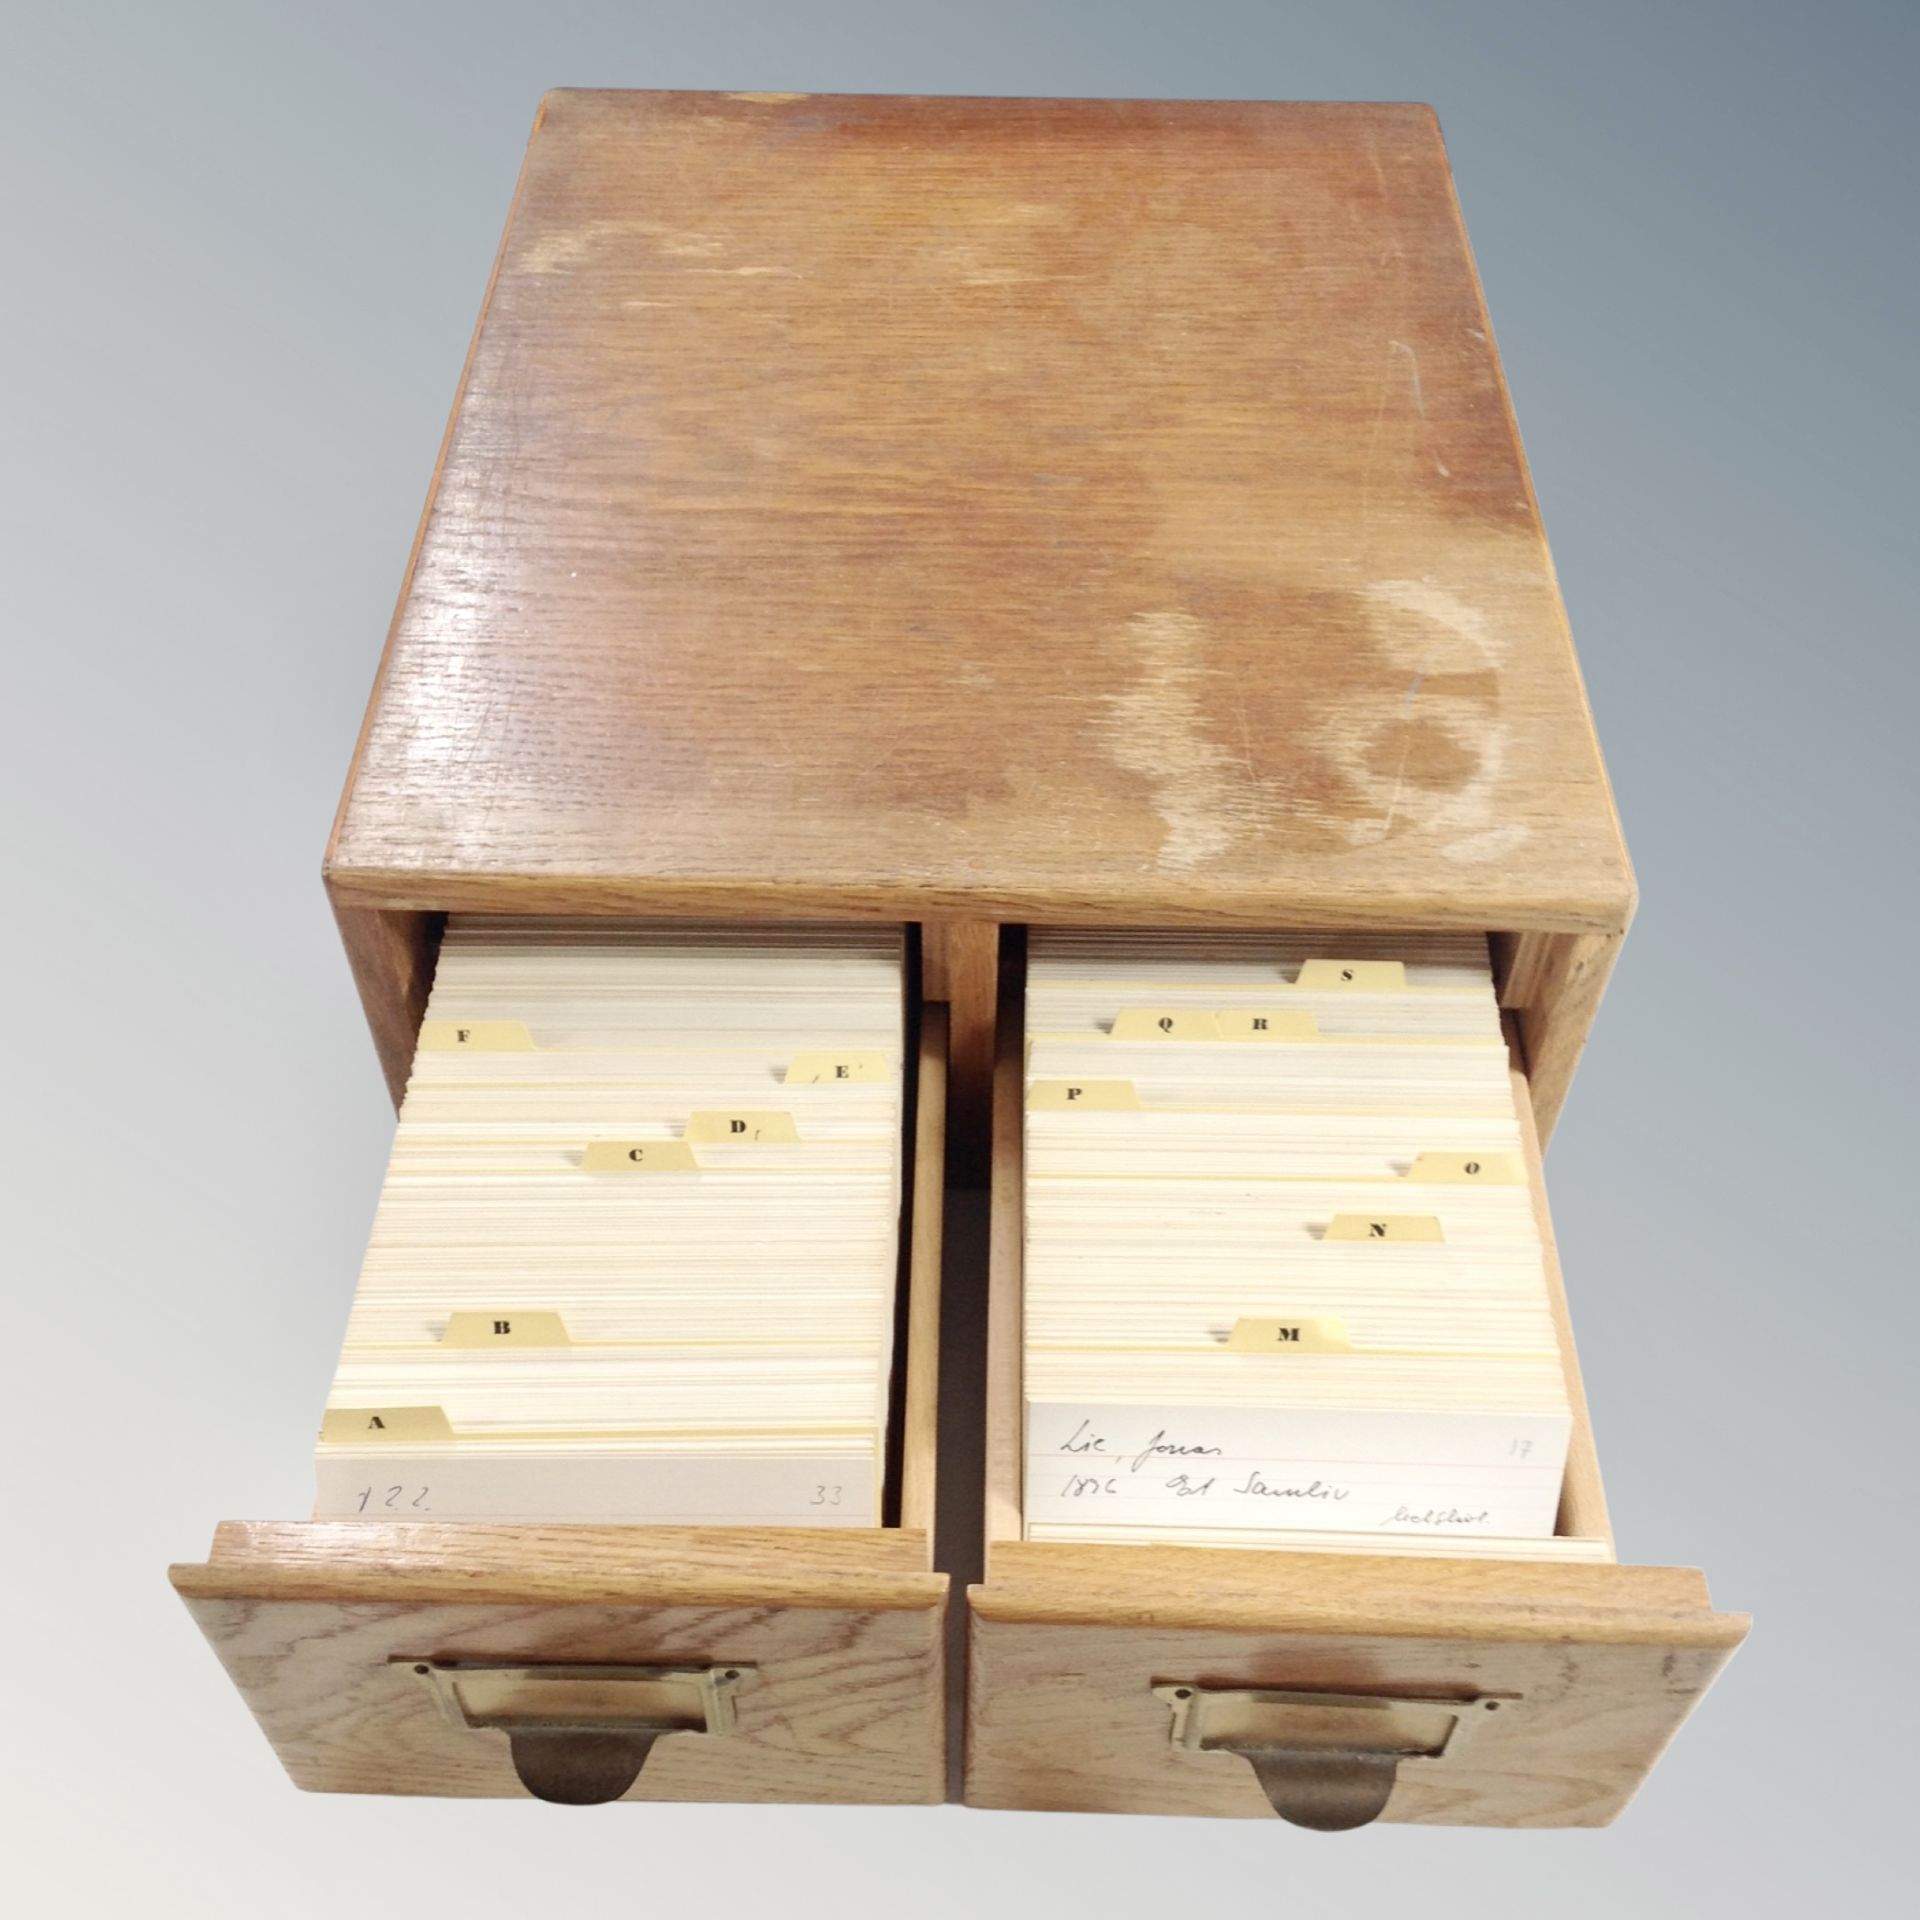 An oak two drawer index chest containing index cards